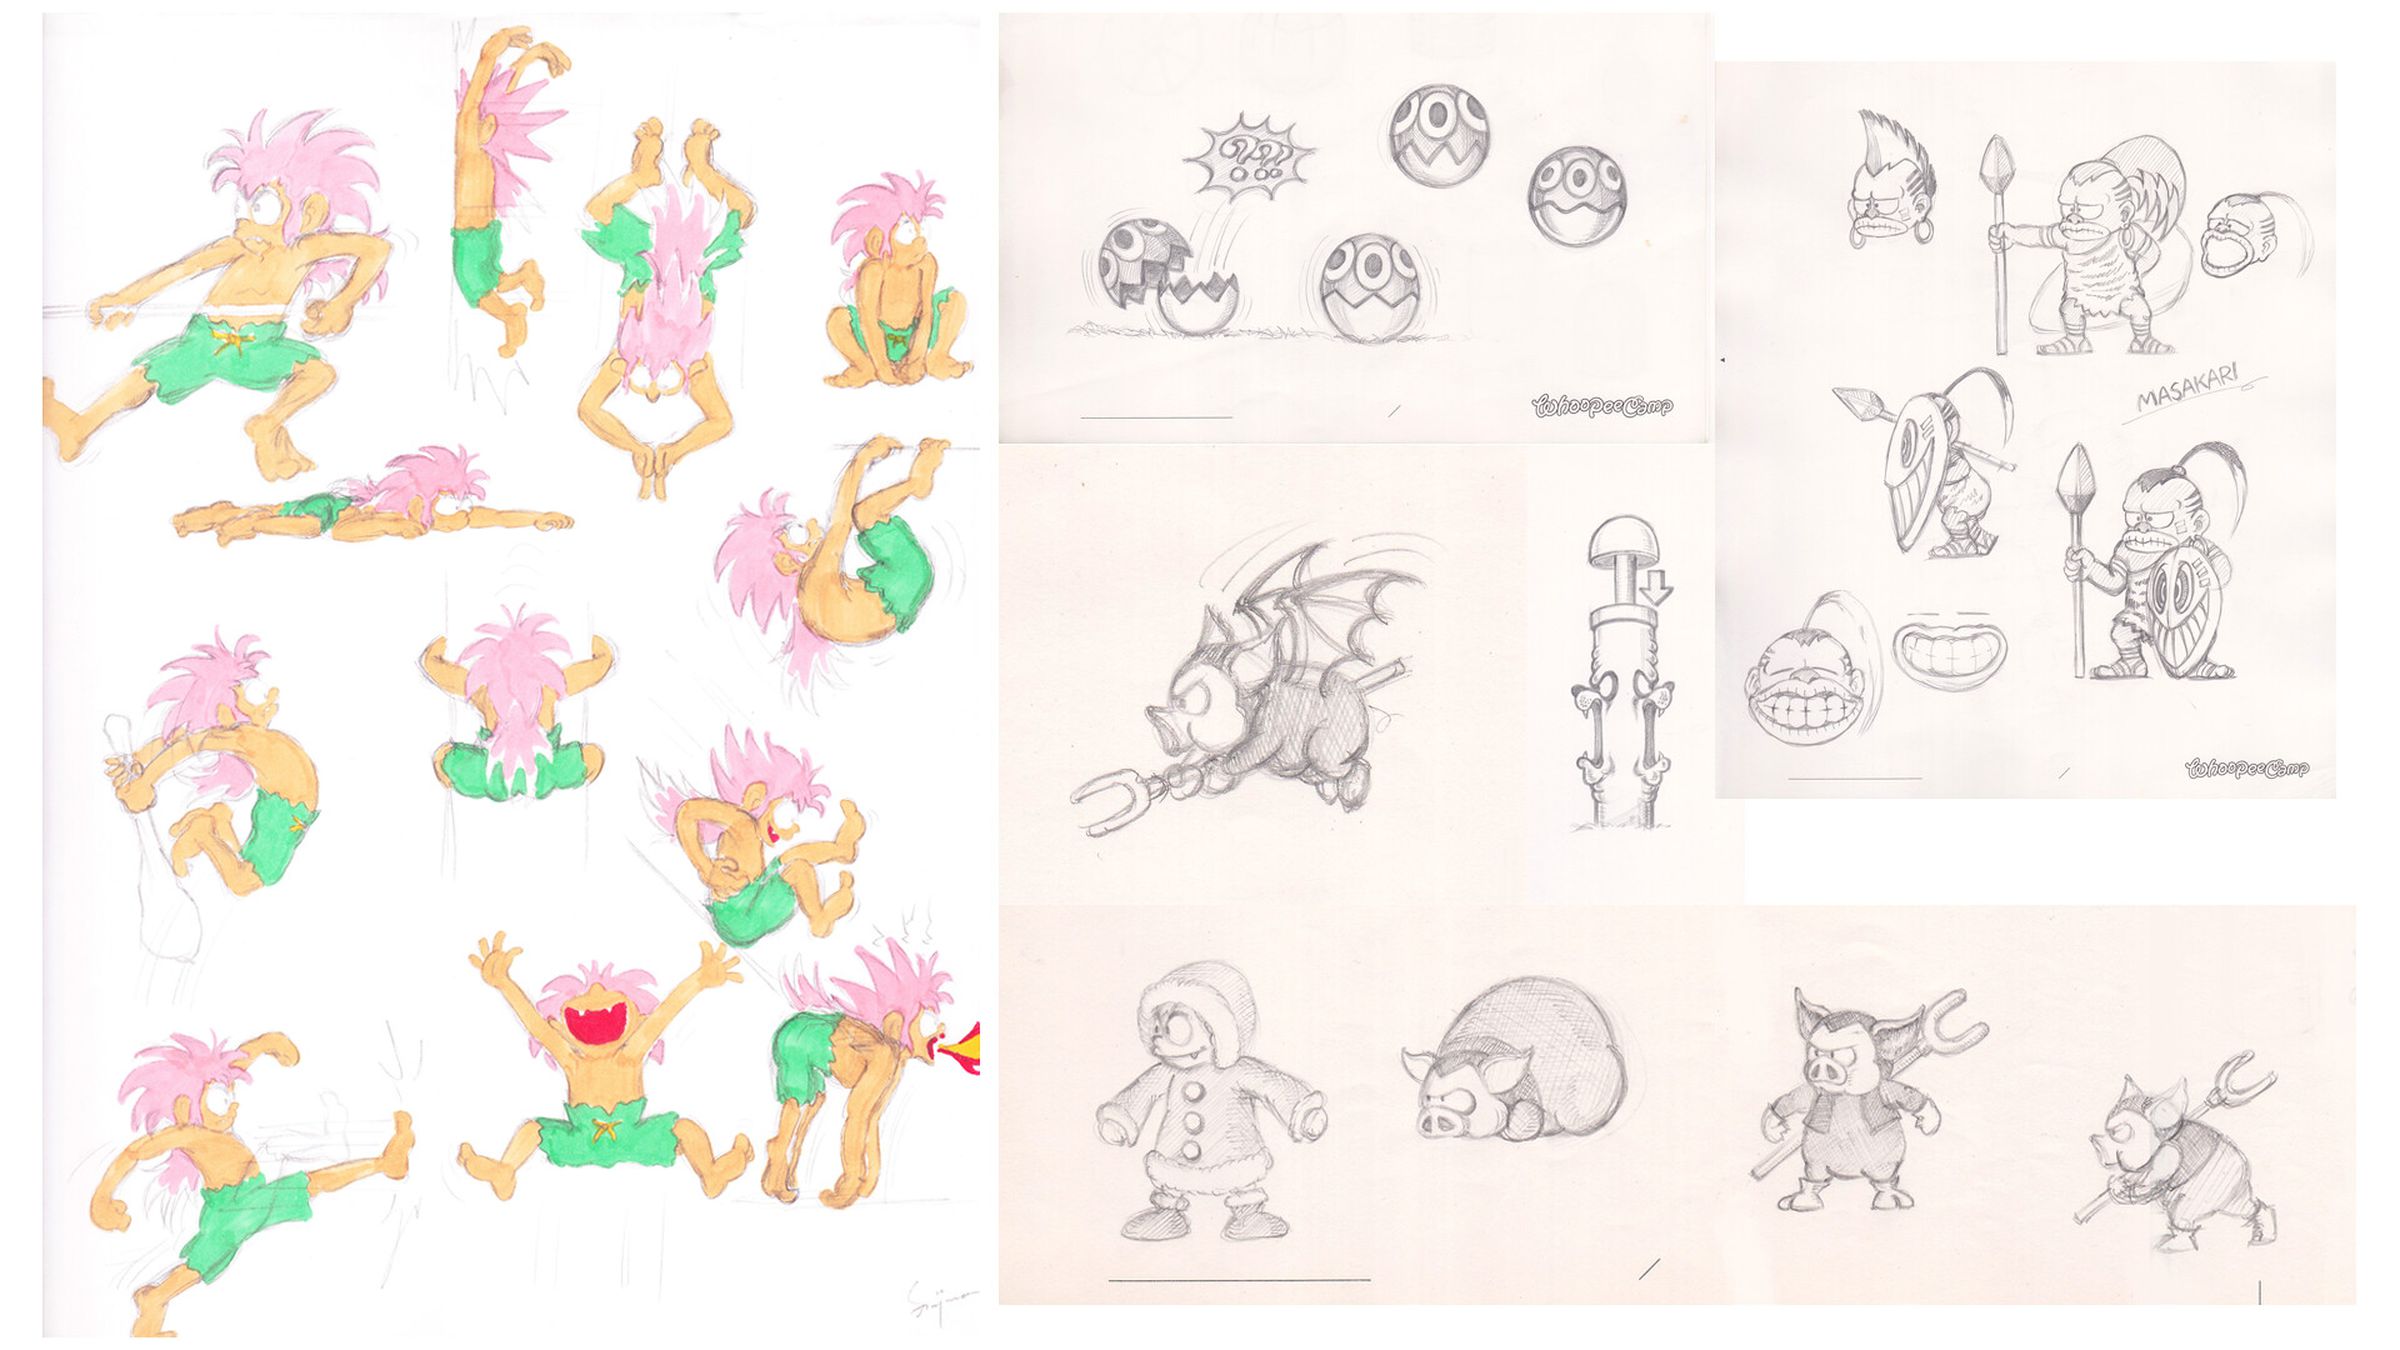 Sketches from the original version of Tomba.